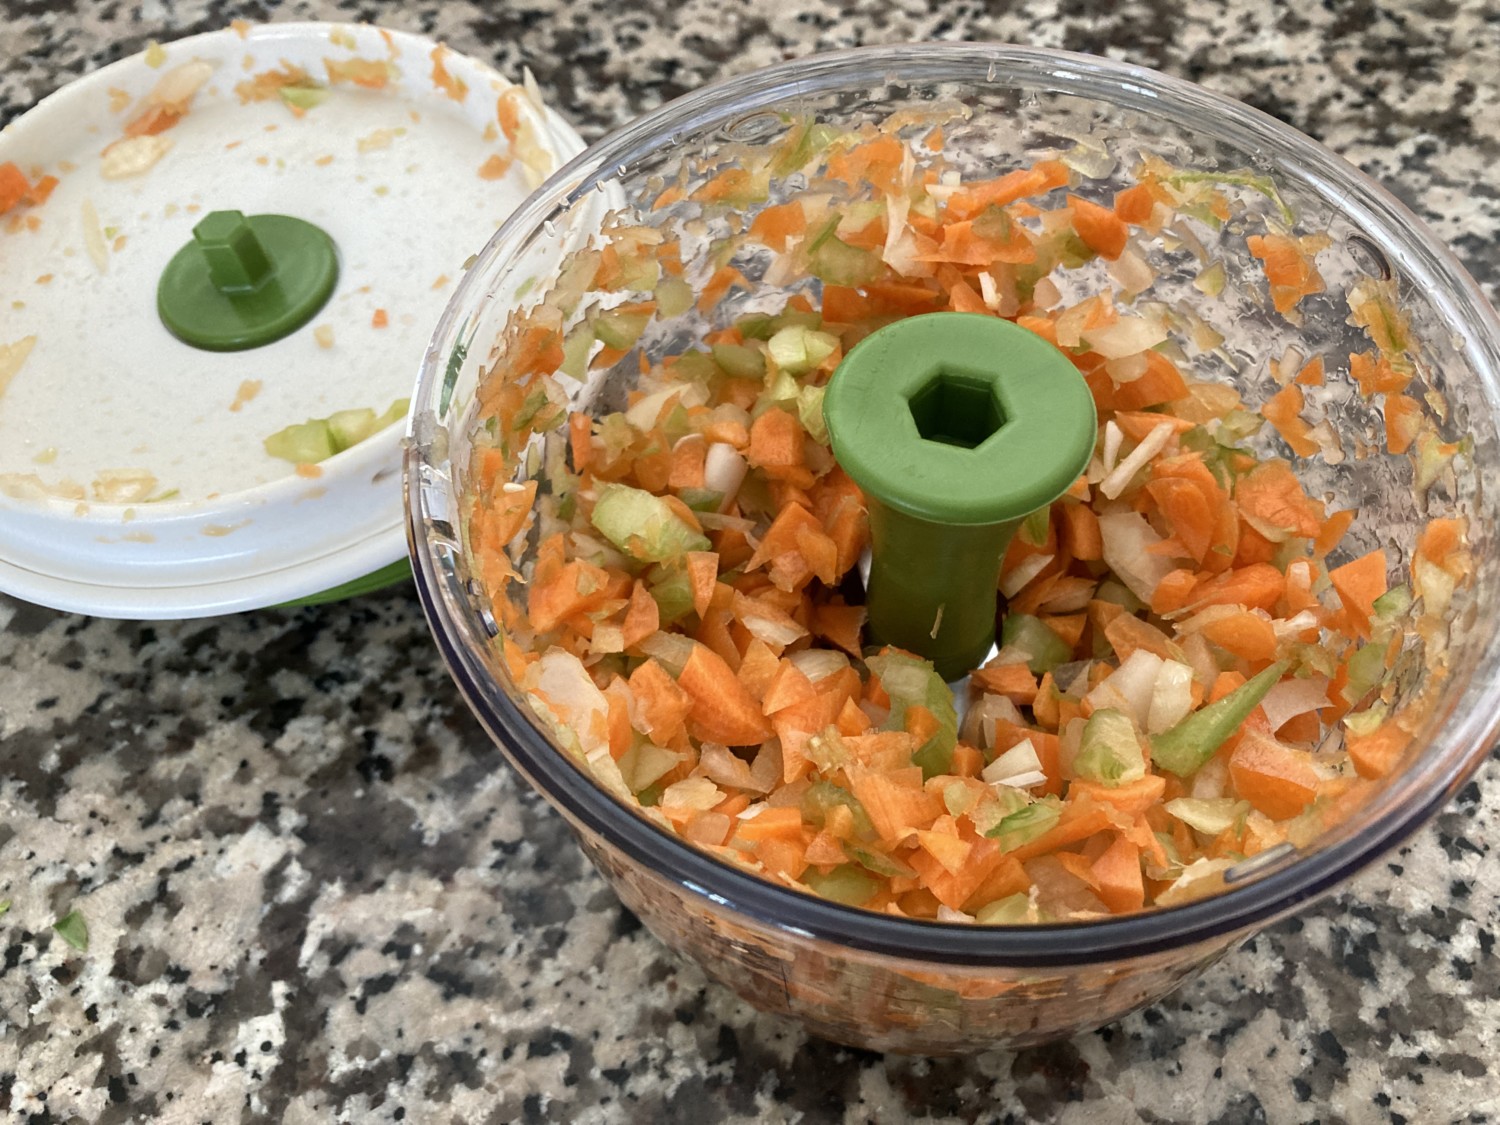 This hand-powered food chopper dices veggies easily at home or while camping